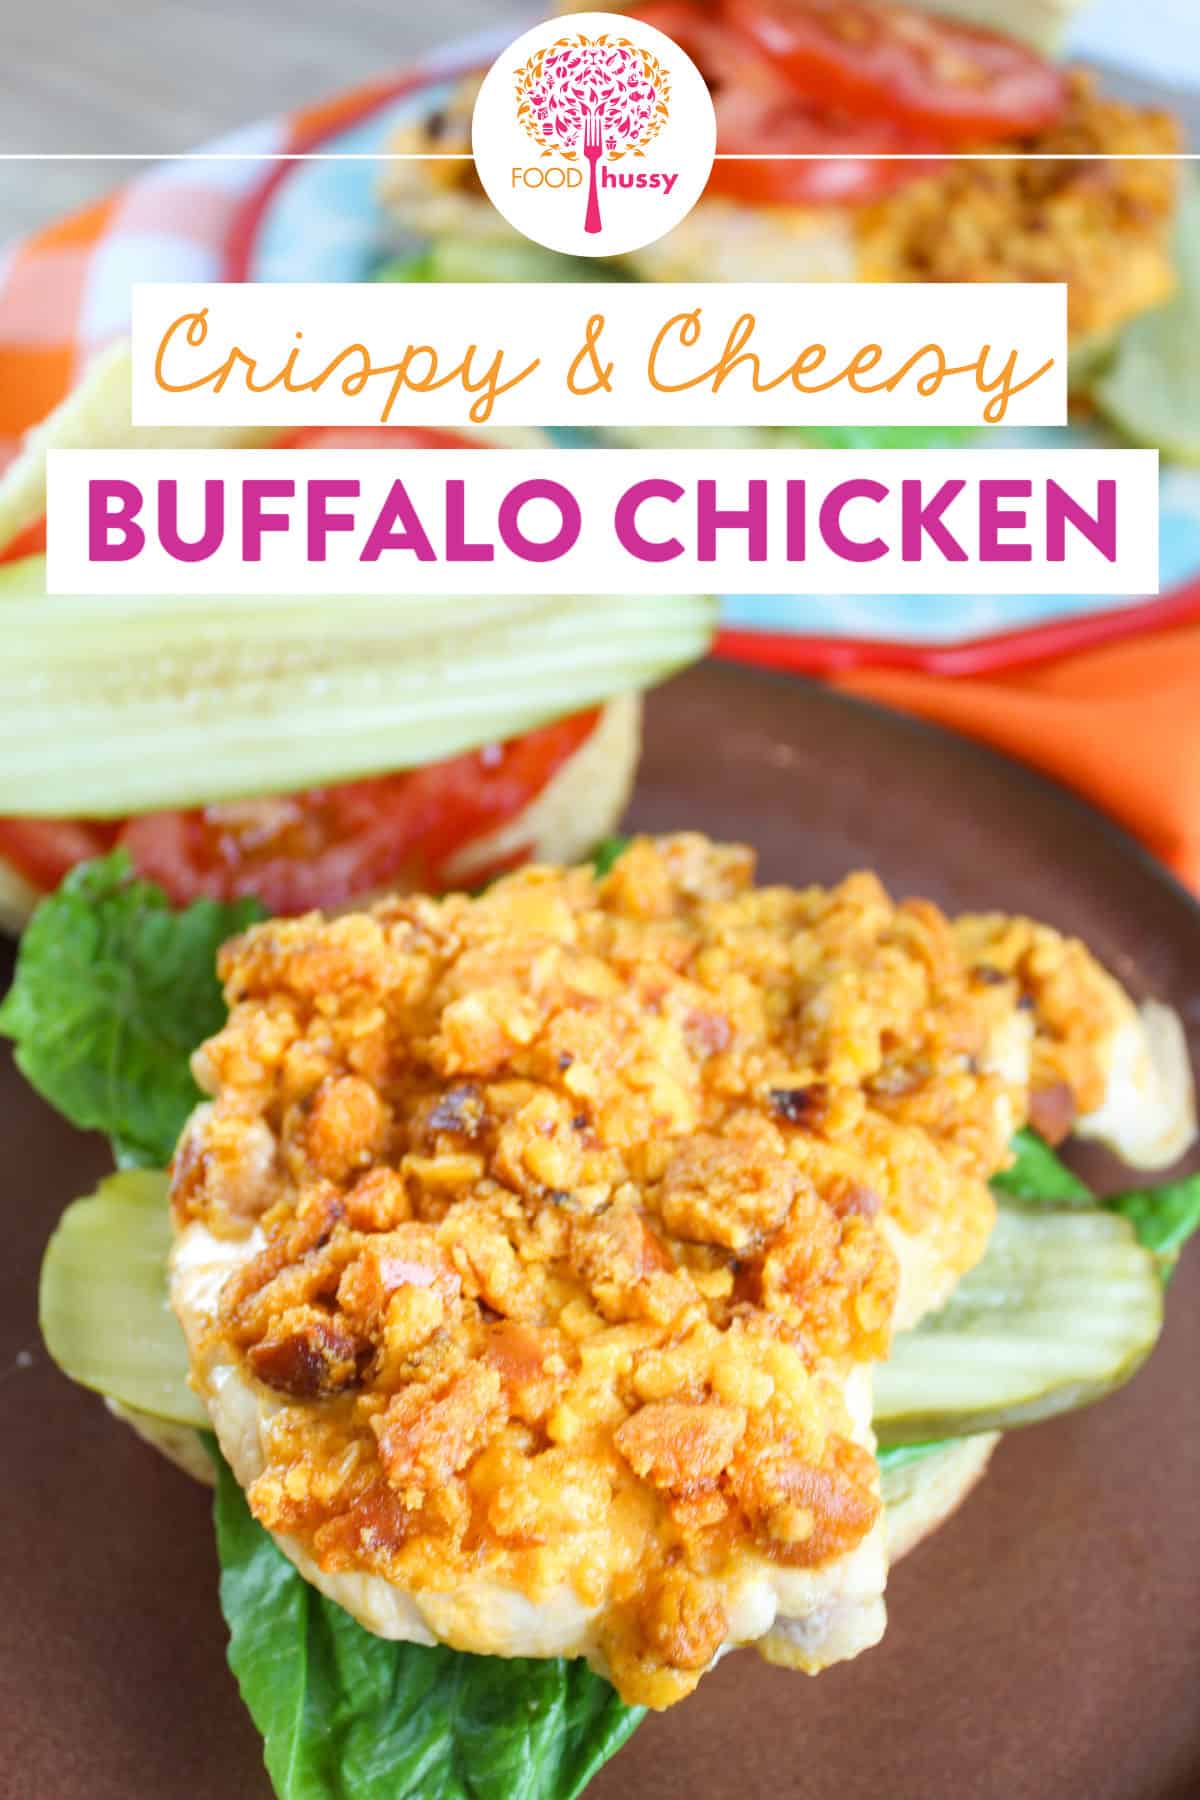 This Crispy Buffalo Chicken Sandwich will be your new favorite! Juicy chicken breast topped with a crunchy mixture of hot pretzels, cheddar cheese and melted butter. It's a super simple recipe, crunchier than ever and there's no frying!  via @foodhussy